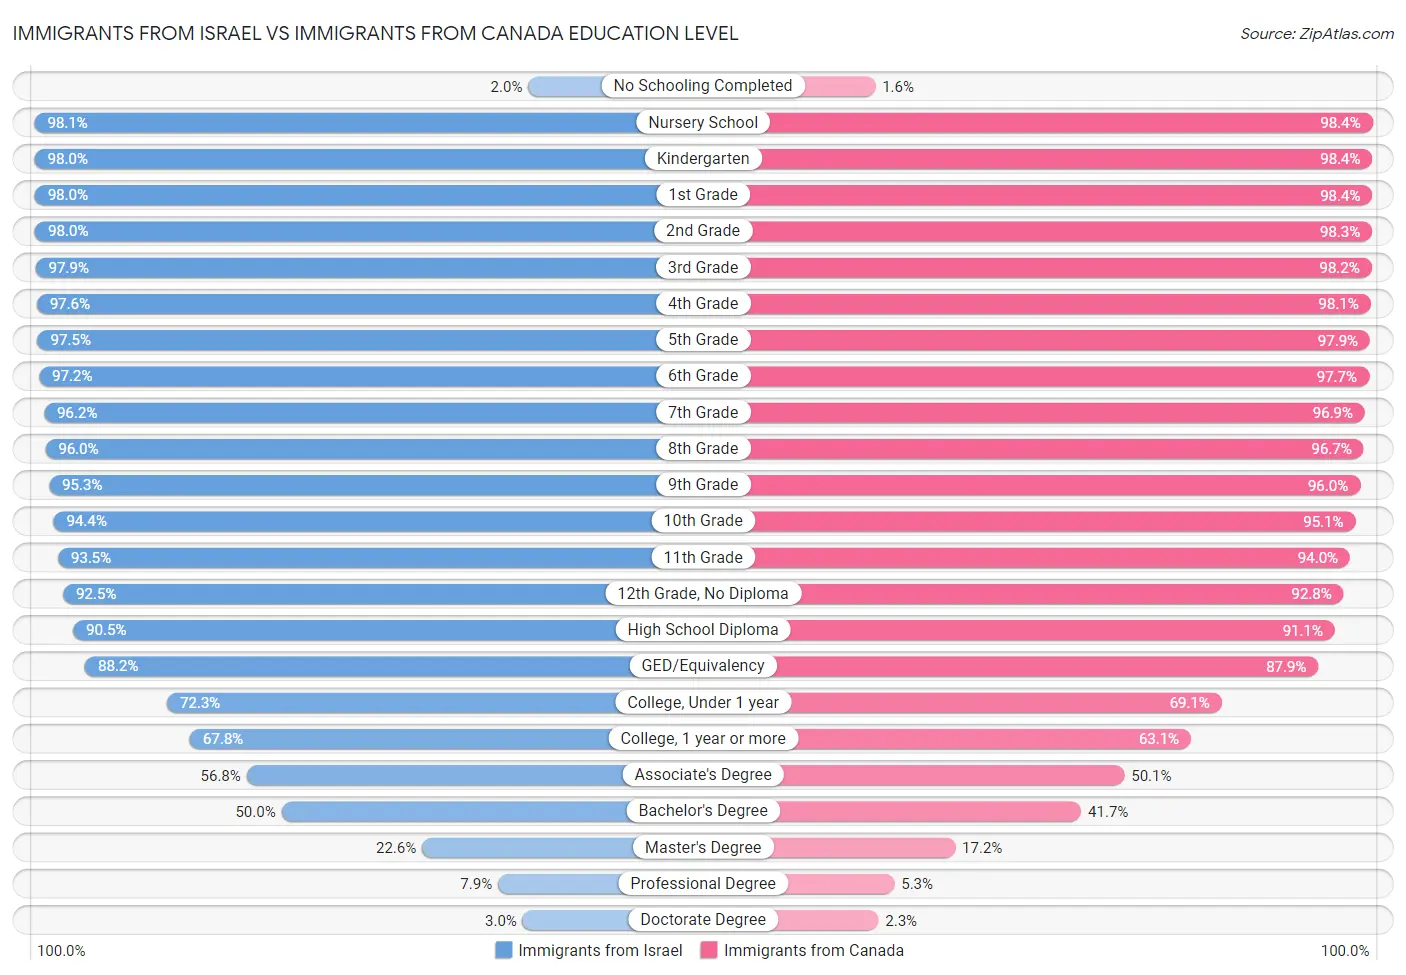 Immigrants from Israel vs Immigrants from Canada Education Level